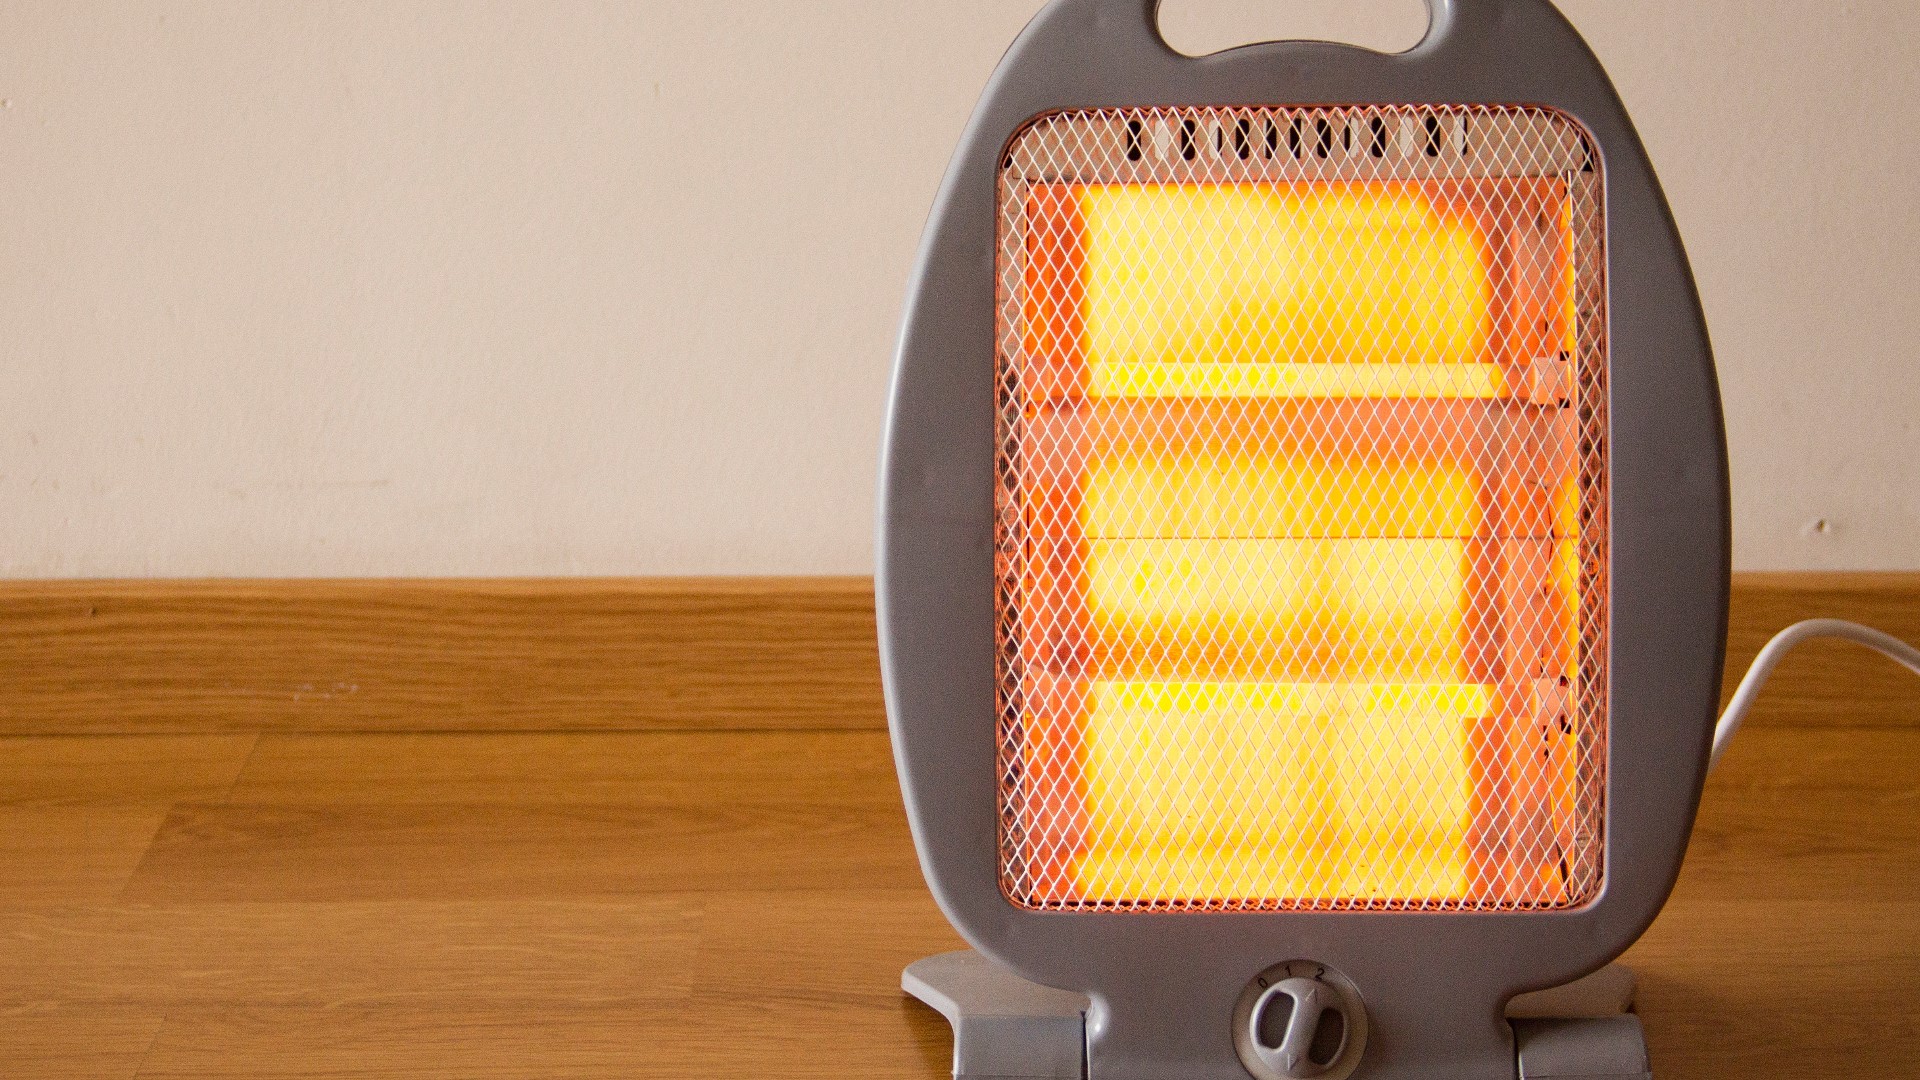 Here's how you can be careful when turning to new heating alternatives.